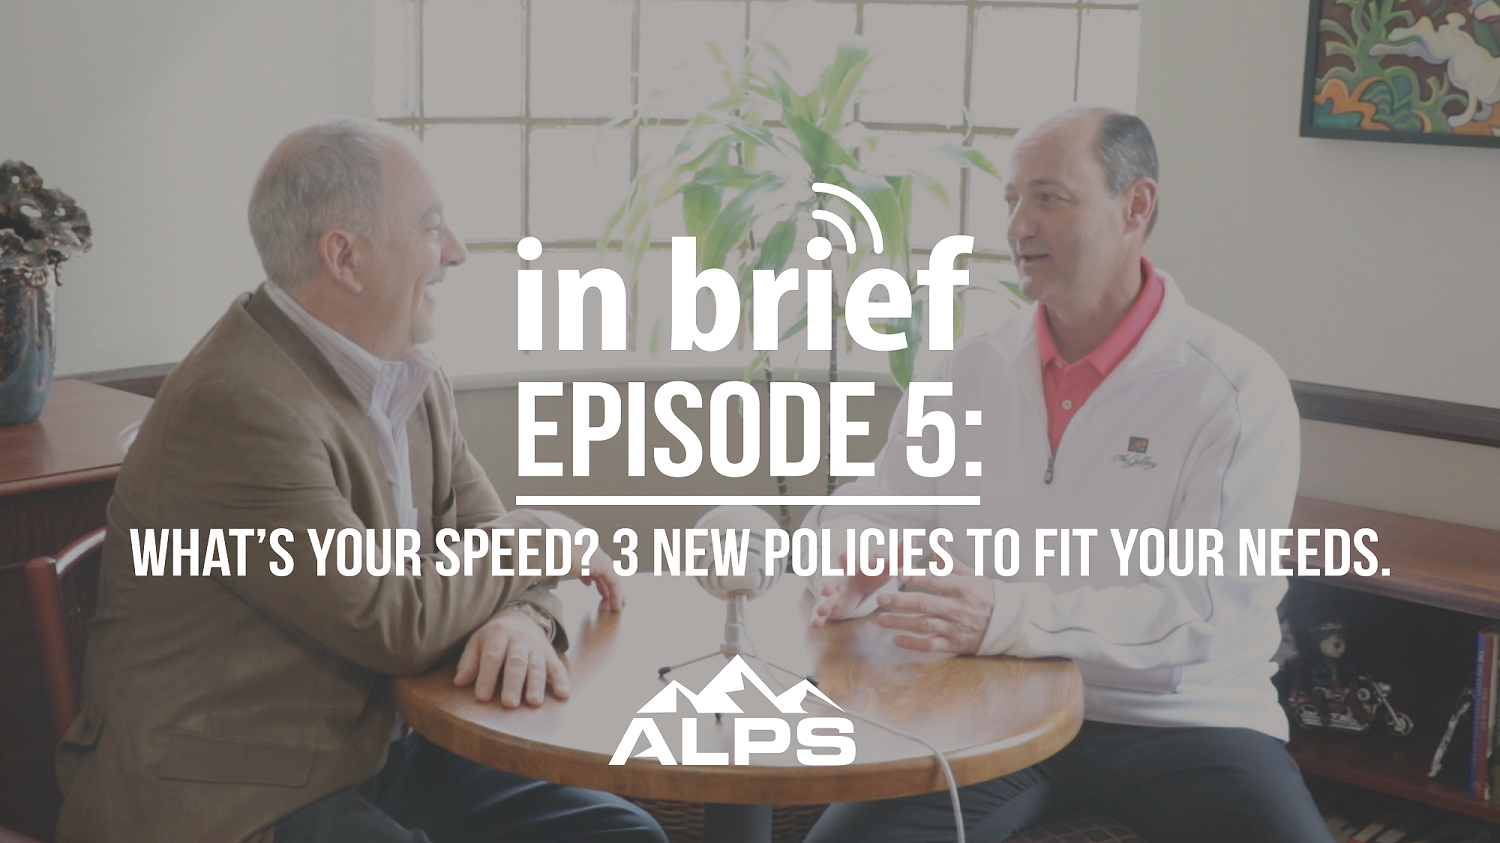 ALPS In Brief Podcast-Episode 5: What's your speed? 3 new policies to fit your needs.